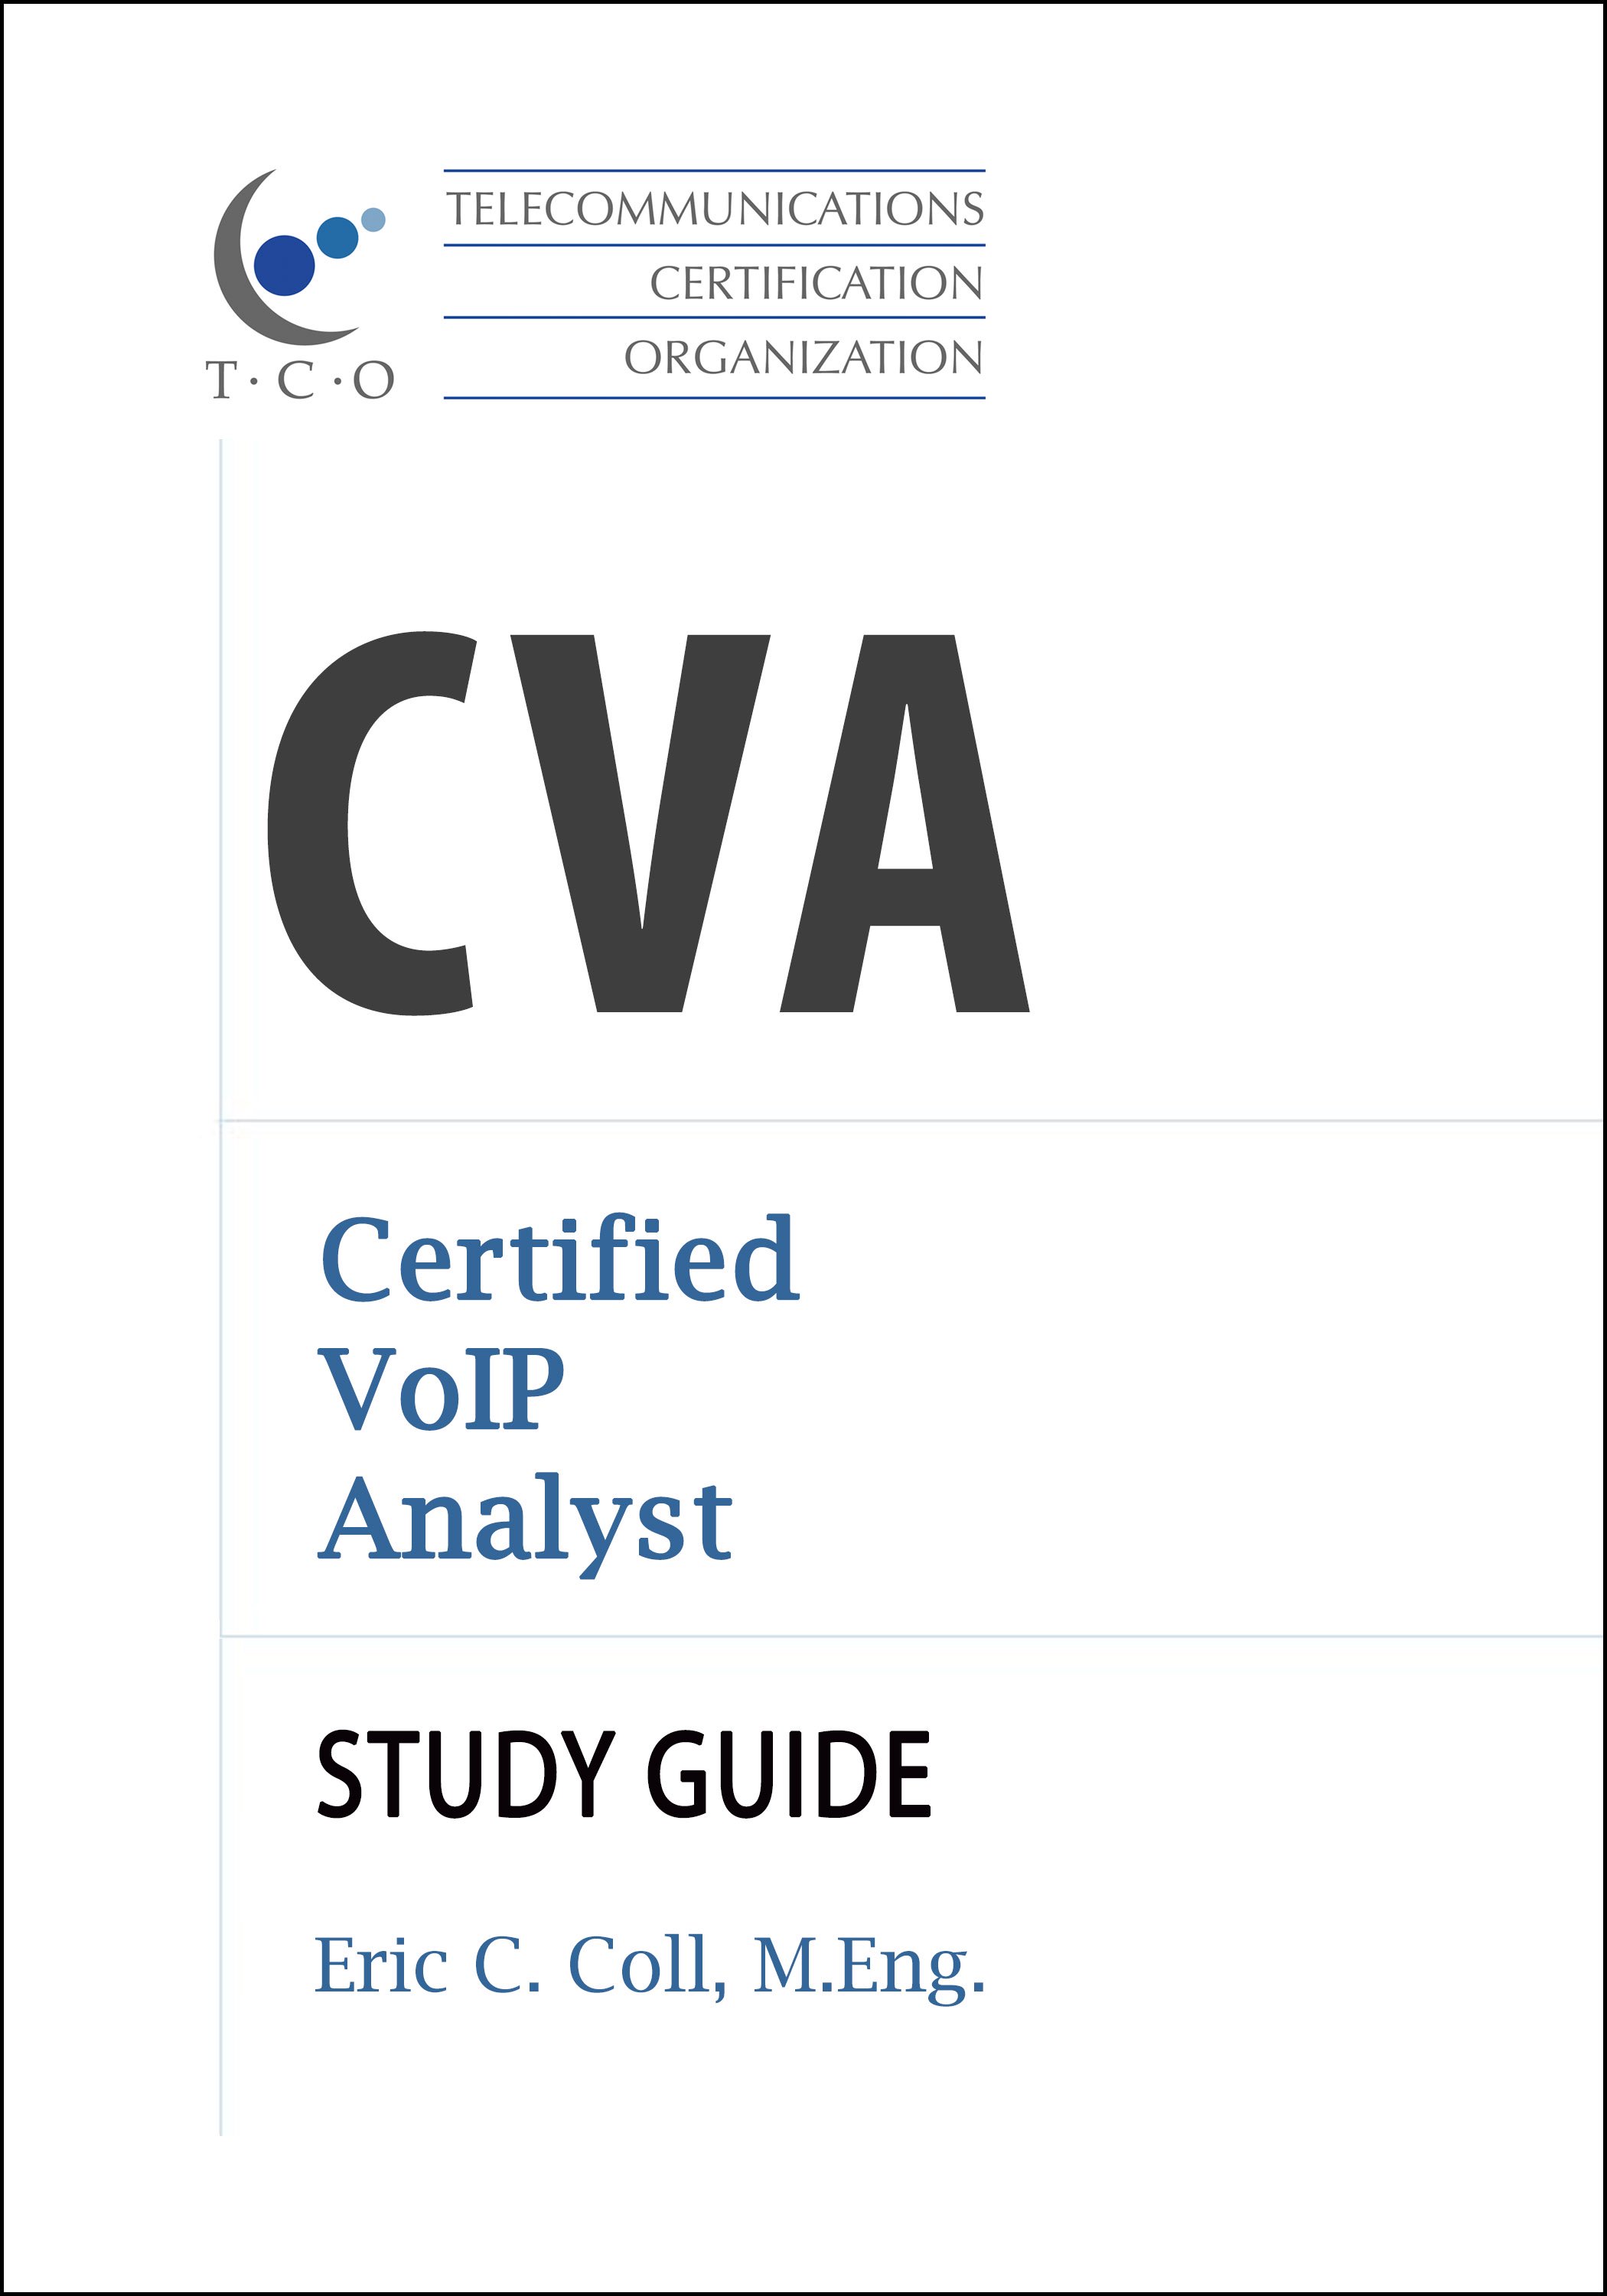 TCO Certified VoIP Analyst (CVA) Study Guide